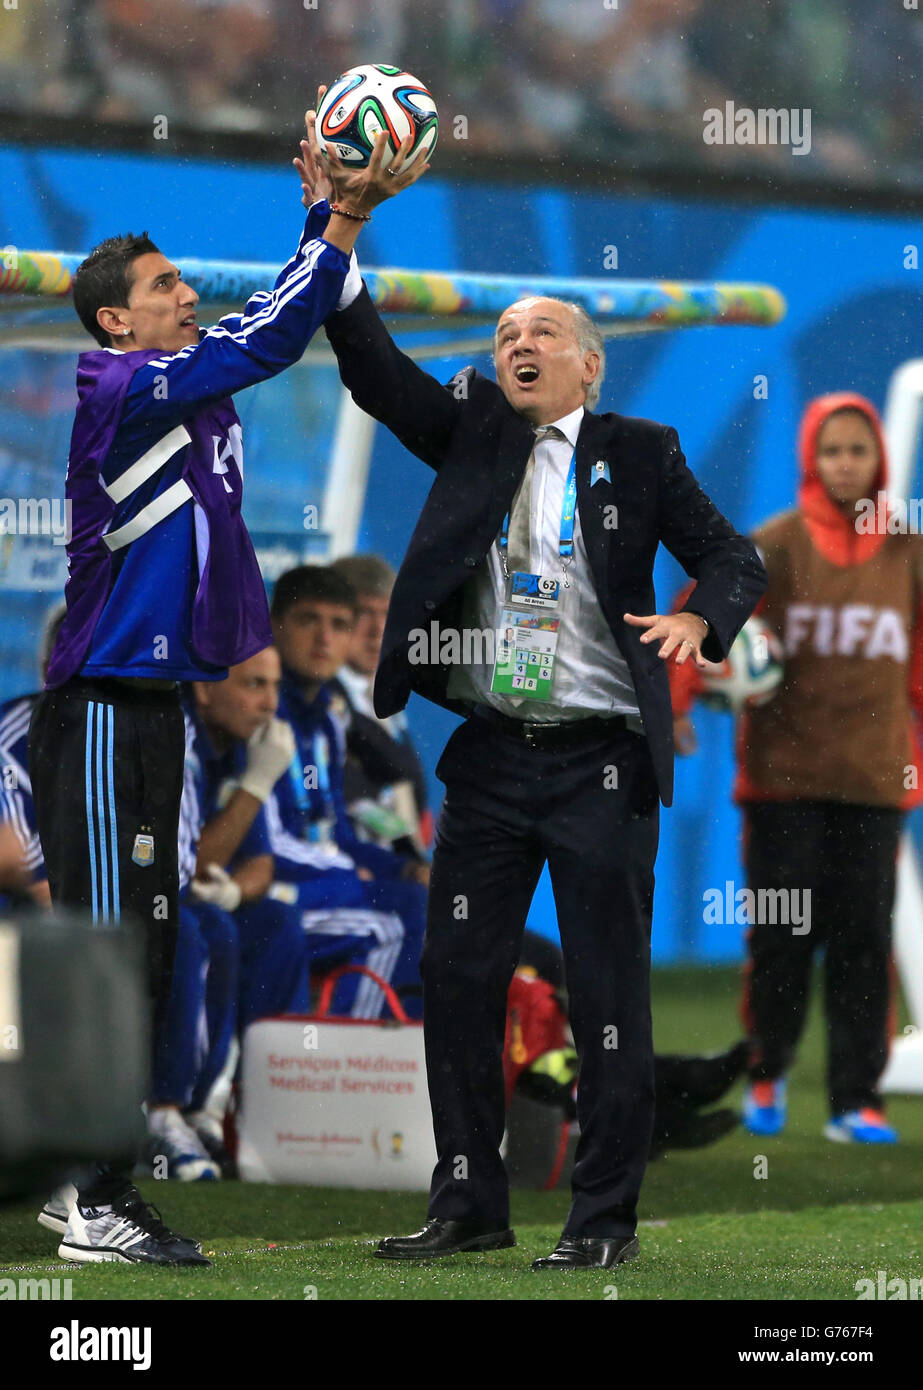 Soccer - FIFA World Cup 2014 - Semi Final - Netherlands v Argentina - Arena de Sao Paulo. Argentina manager Alenjandro Sabella grabs the ball out of the air on the touchline Stock Photo